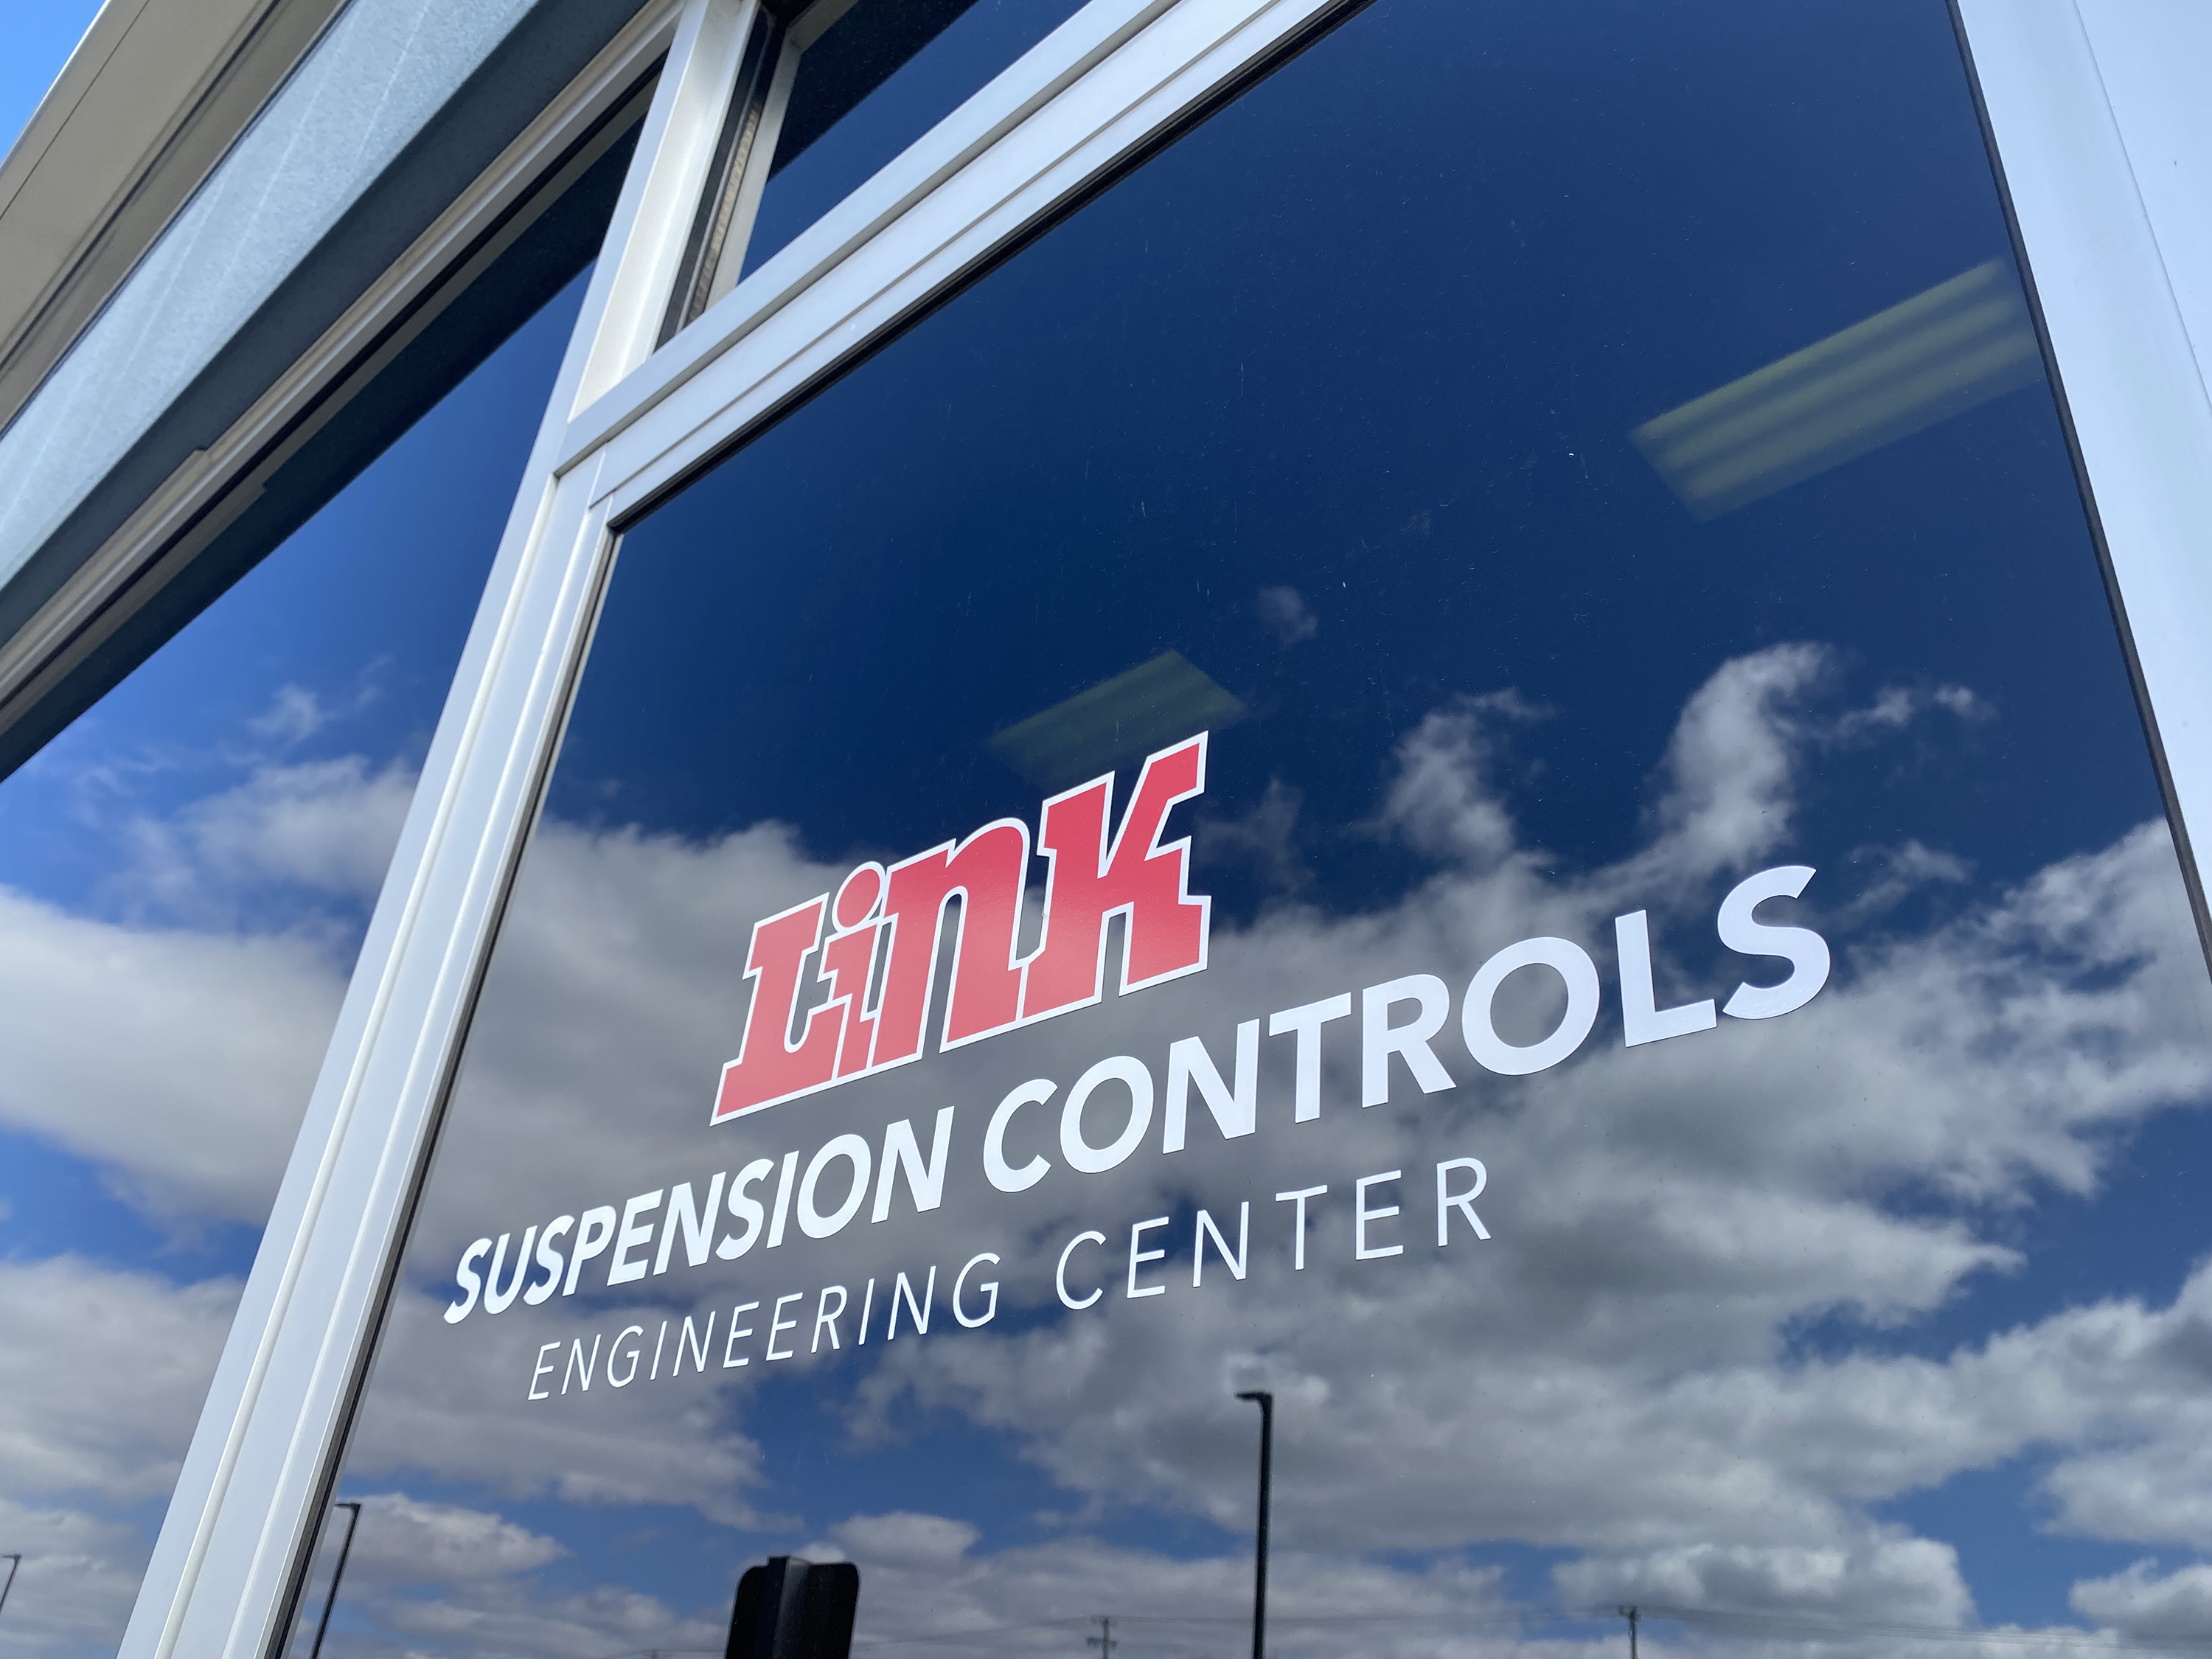 Link’s Grand Rapids-based Suspension Controls Engineering Center will help focus a segment of Link’s product engineering team engaged in developing and expanding its suspension control technologies.